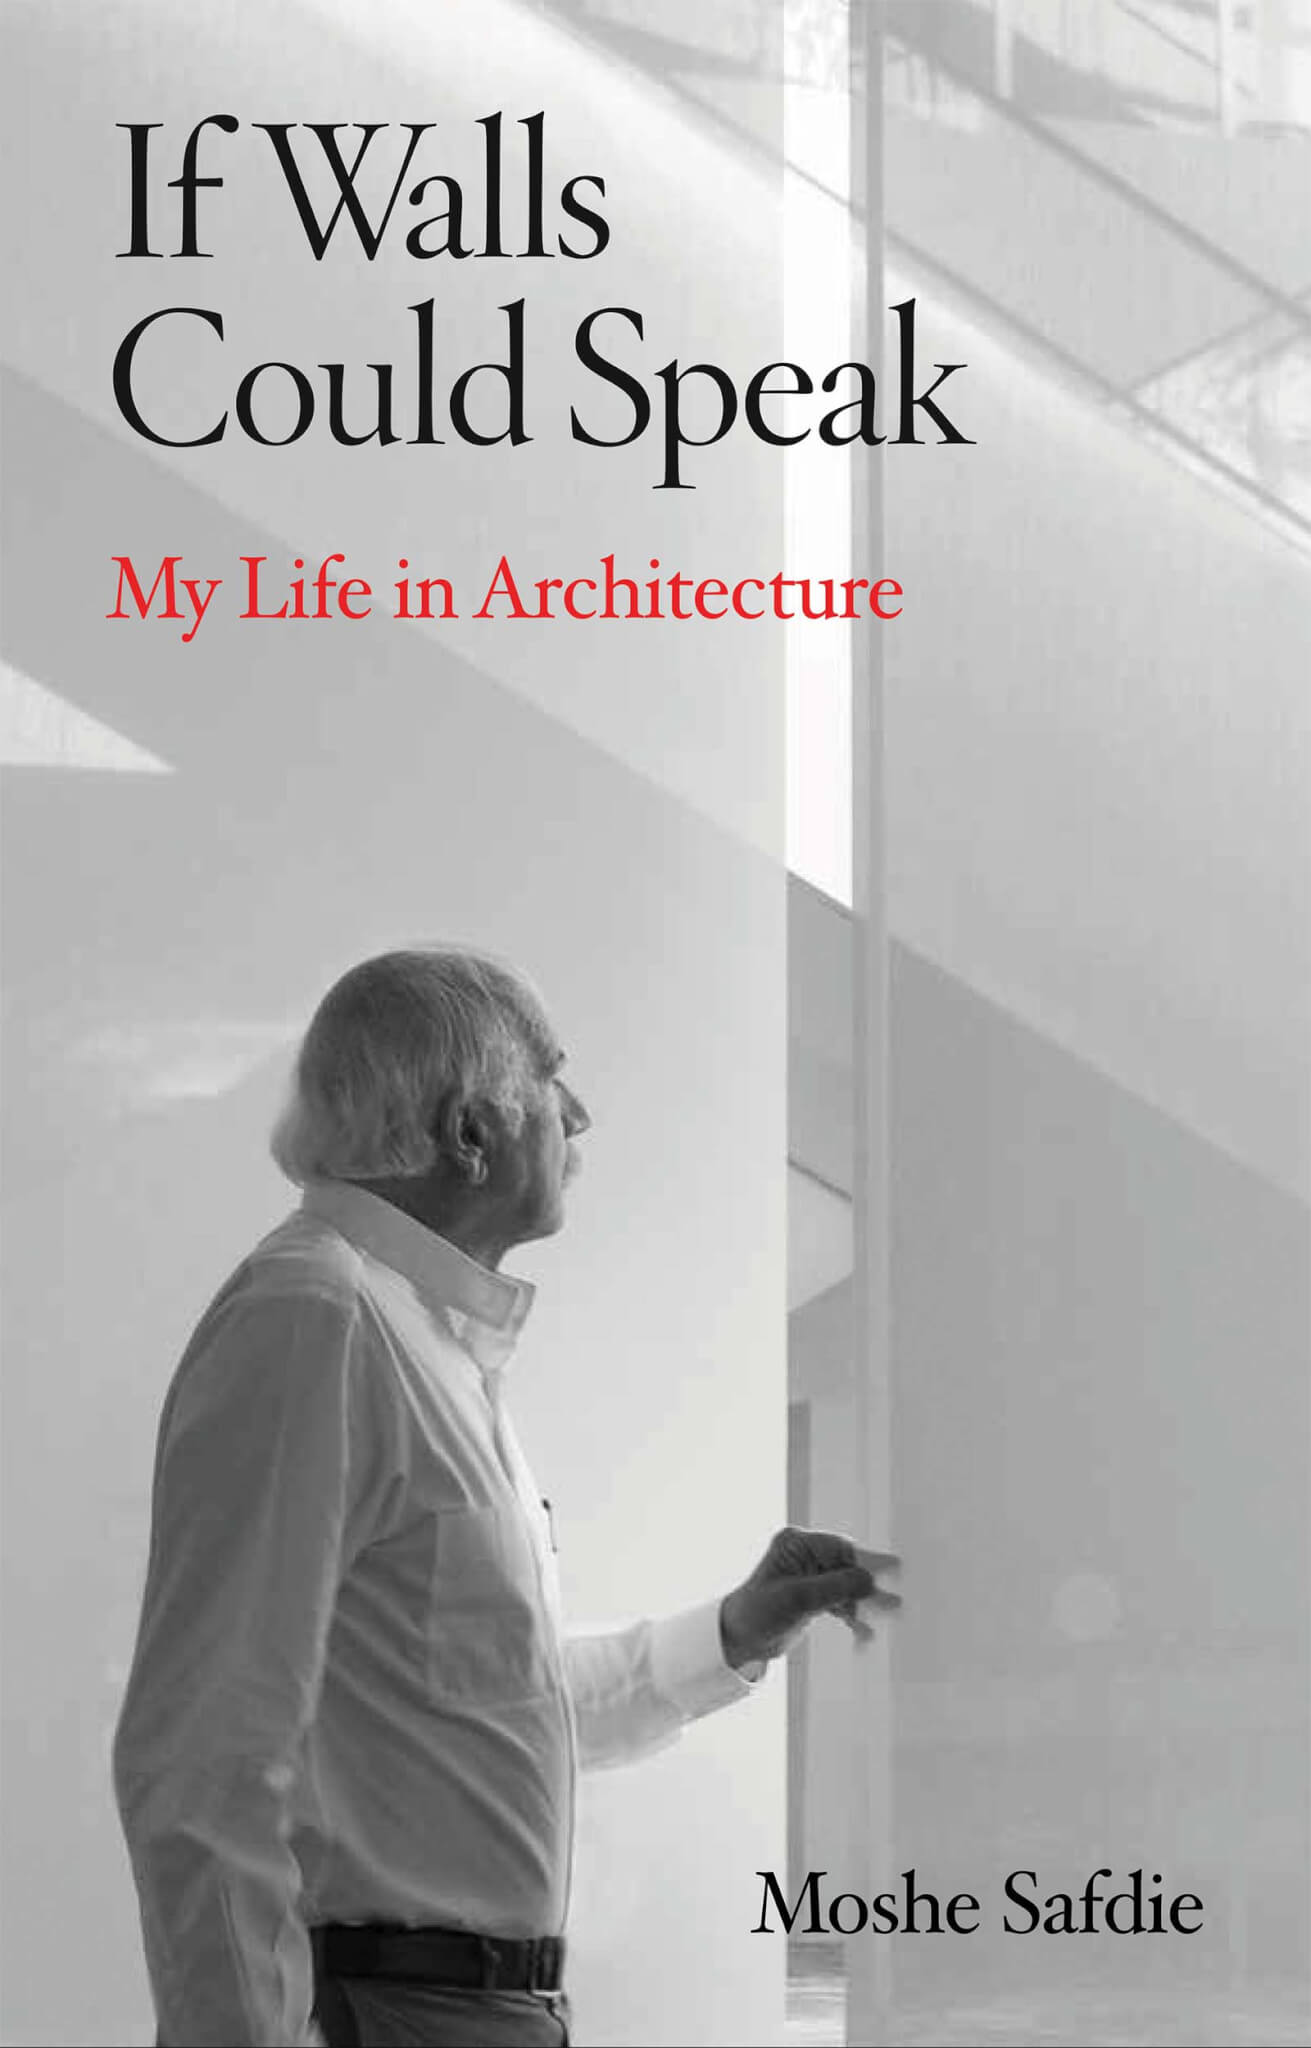 book cover featuring moshe safdie and a building